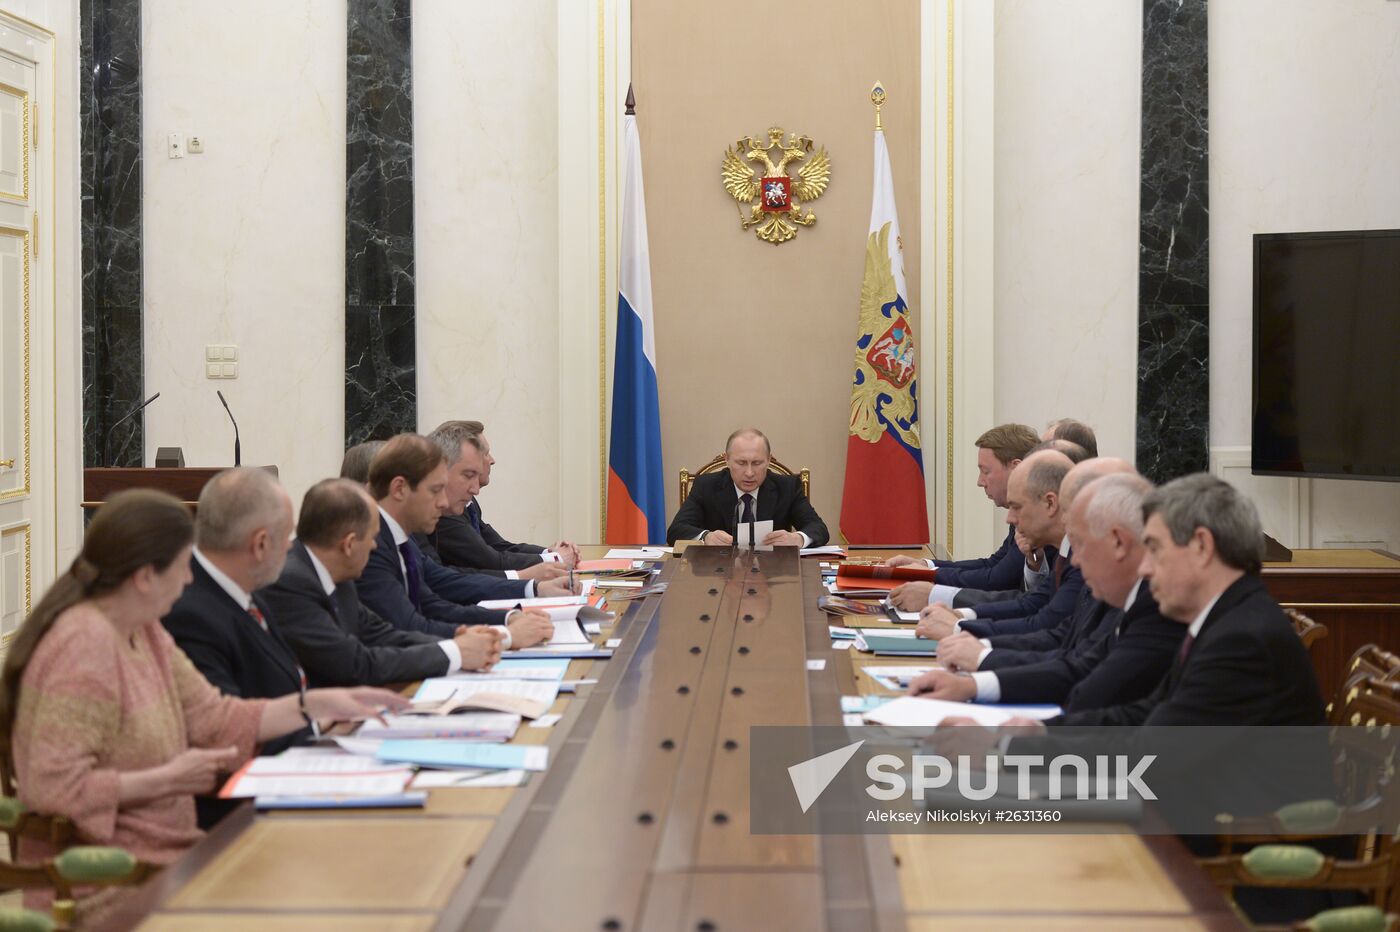 President Vladimir Putin holds meeting of Commission for Military Technology Cooperation with Foreign States